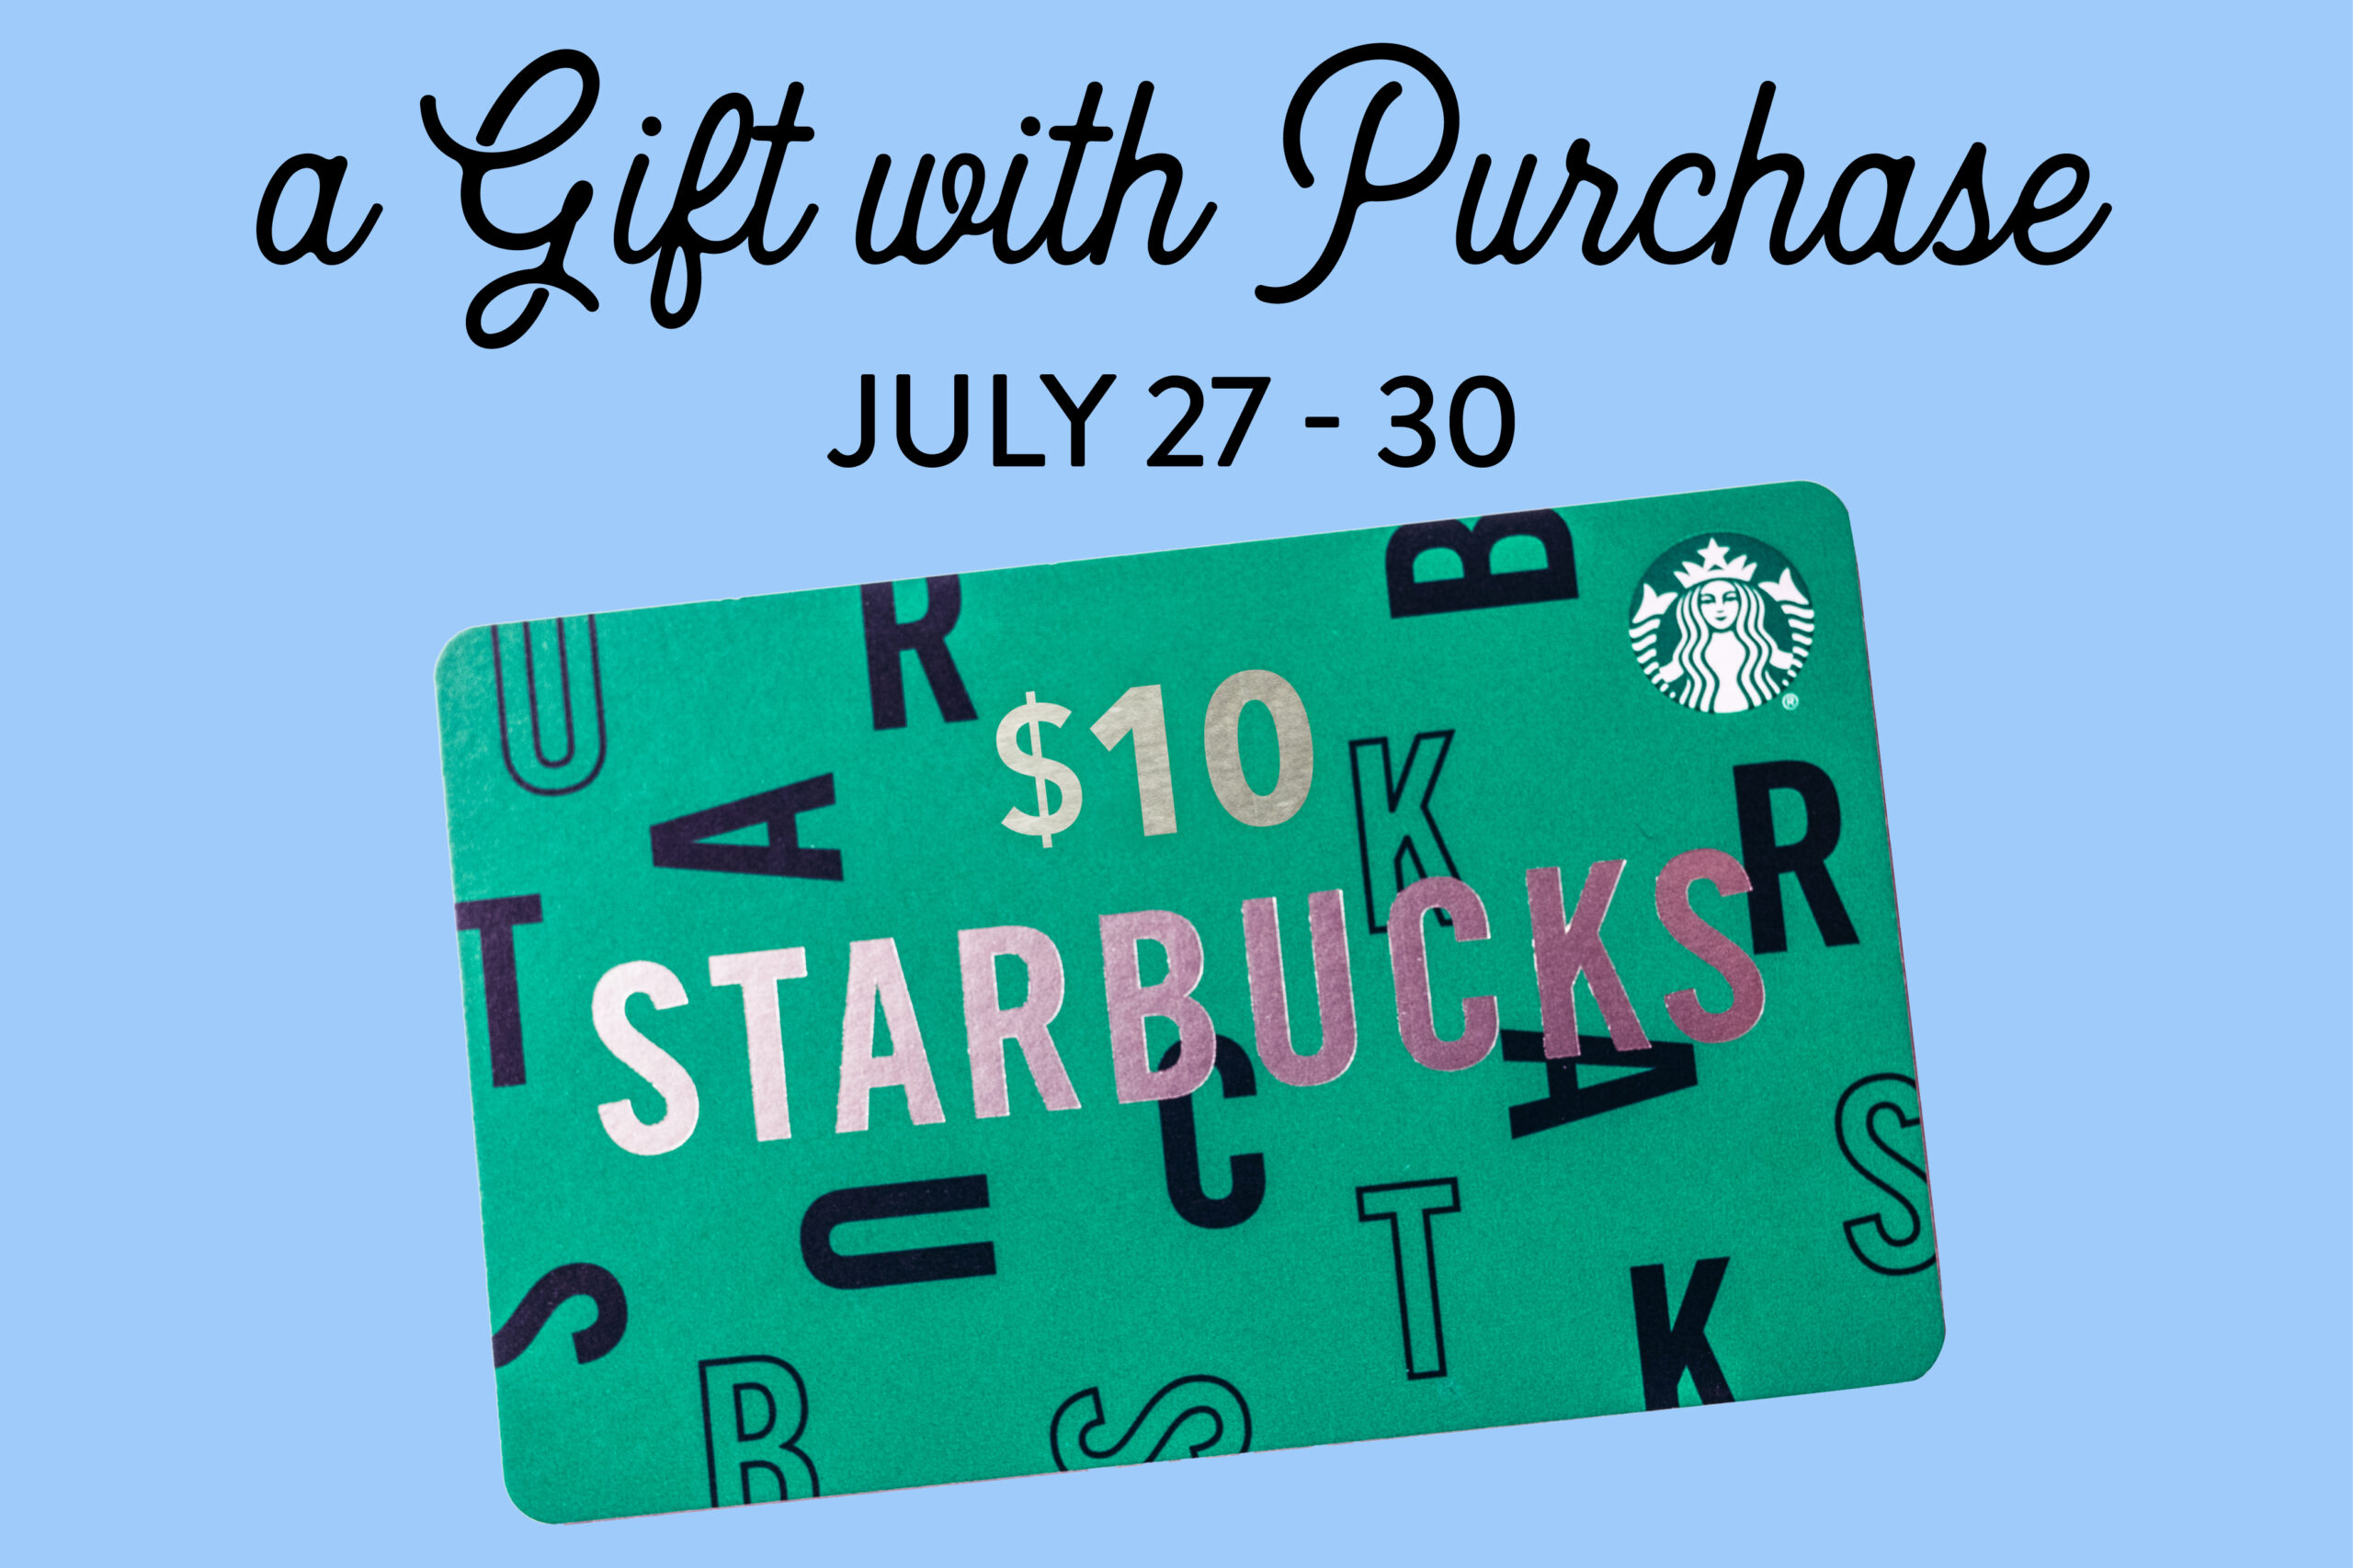 Get a FREE $10 Starbucks Gift Card!